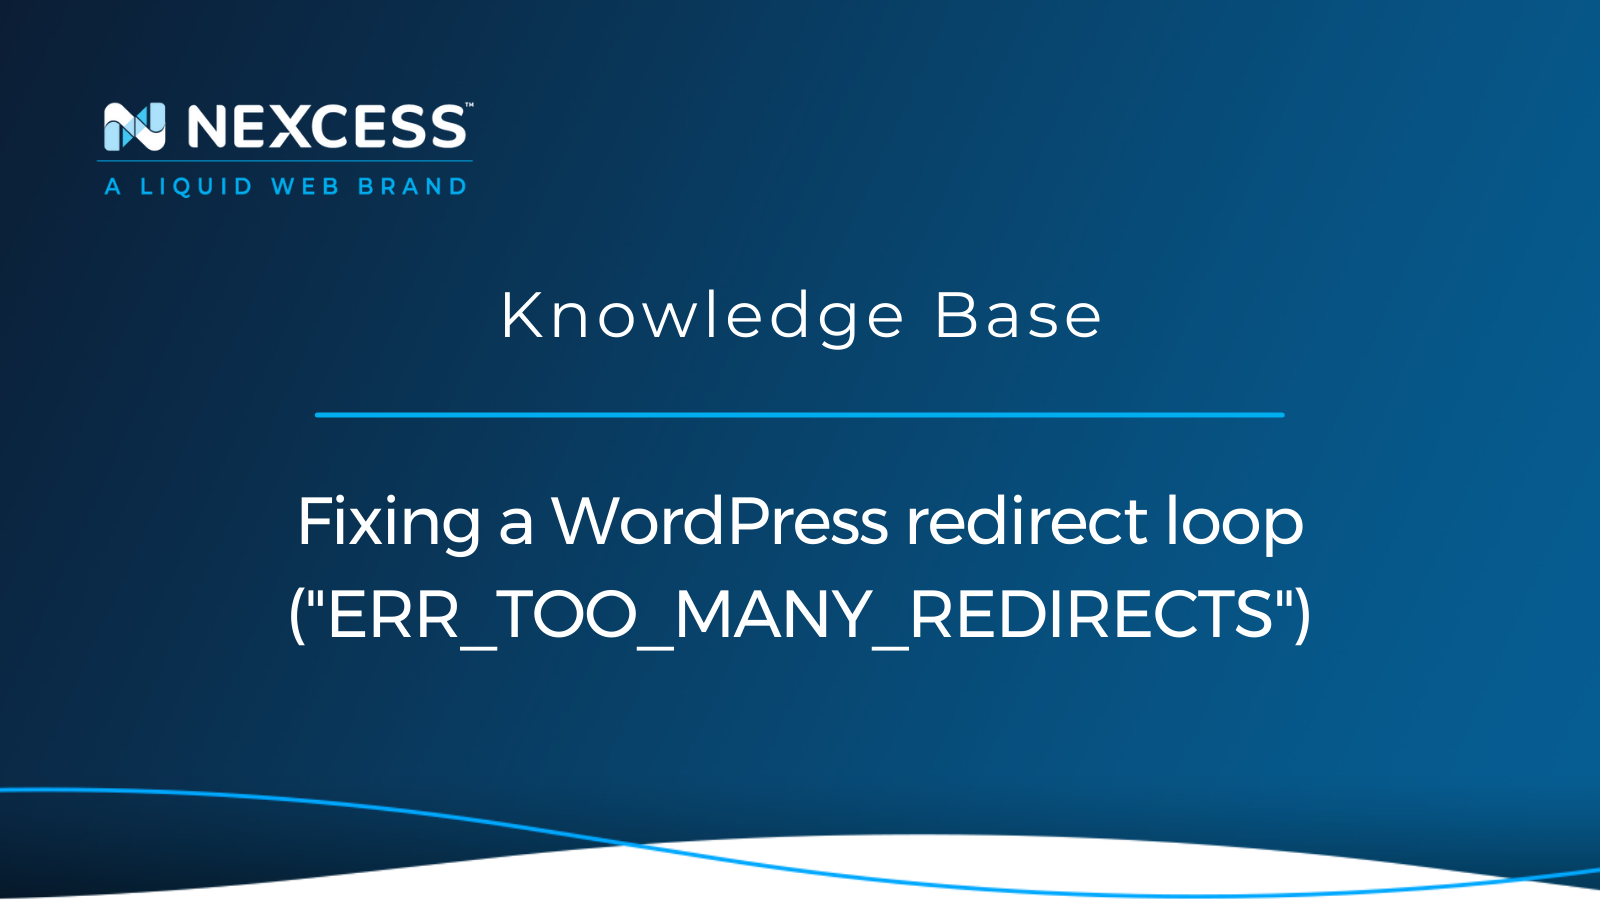 Fixing a WordPress redirect loop ("ERR_TOO_MANY_REDIRECTS")